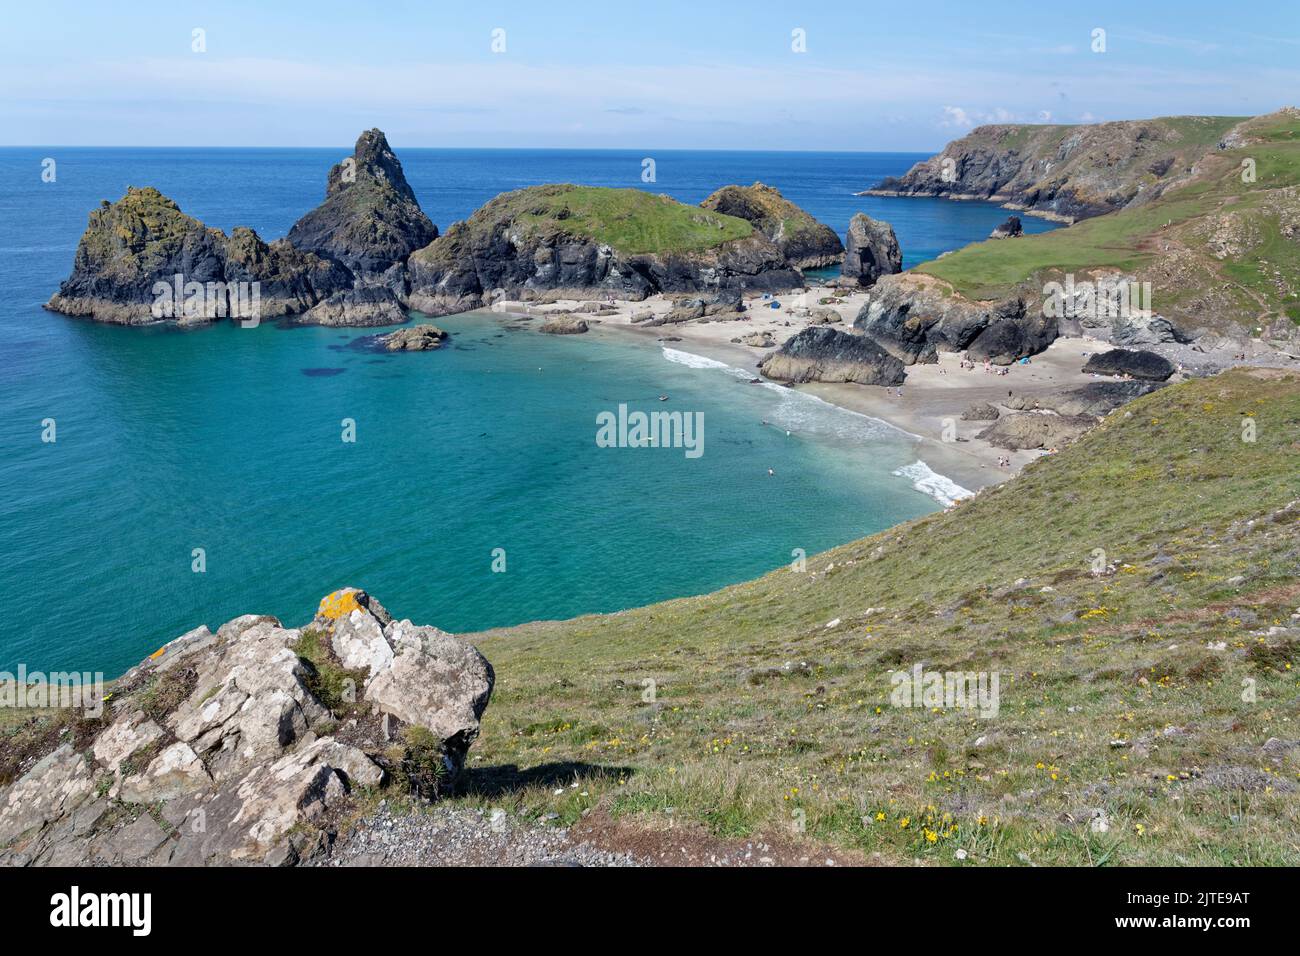 Kynance Cove Overview, The Lizard, South Cornwall, Royaume-Uni, juin 2021. Banque D'Images